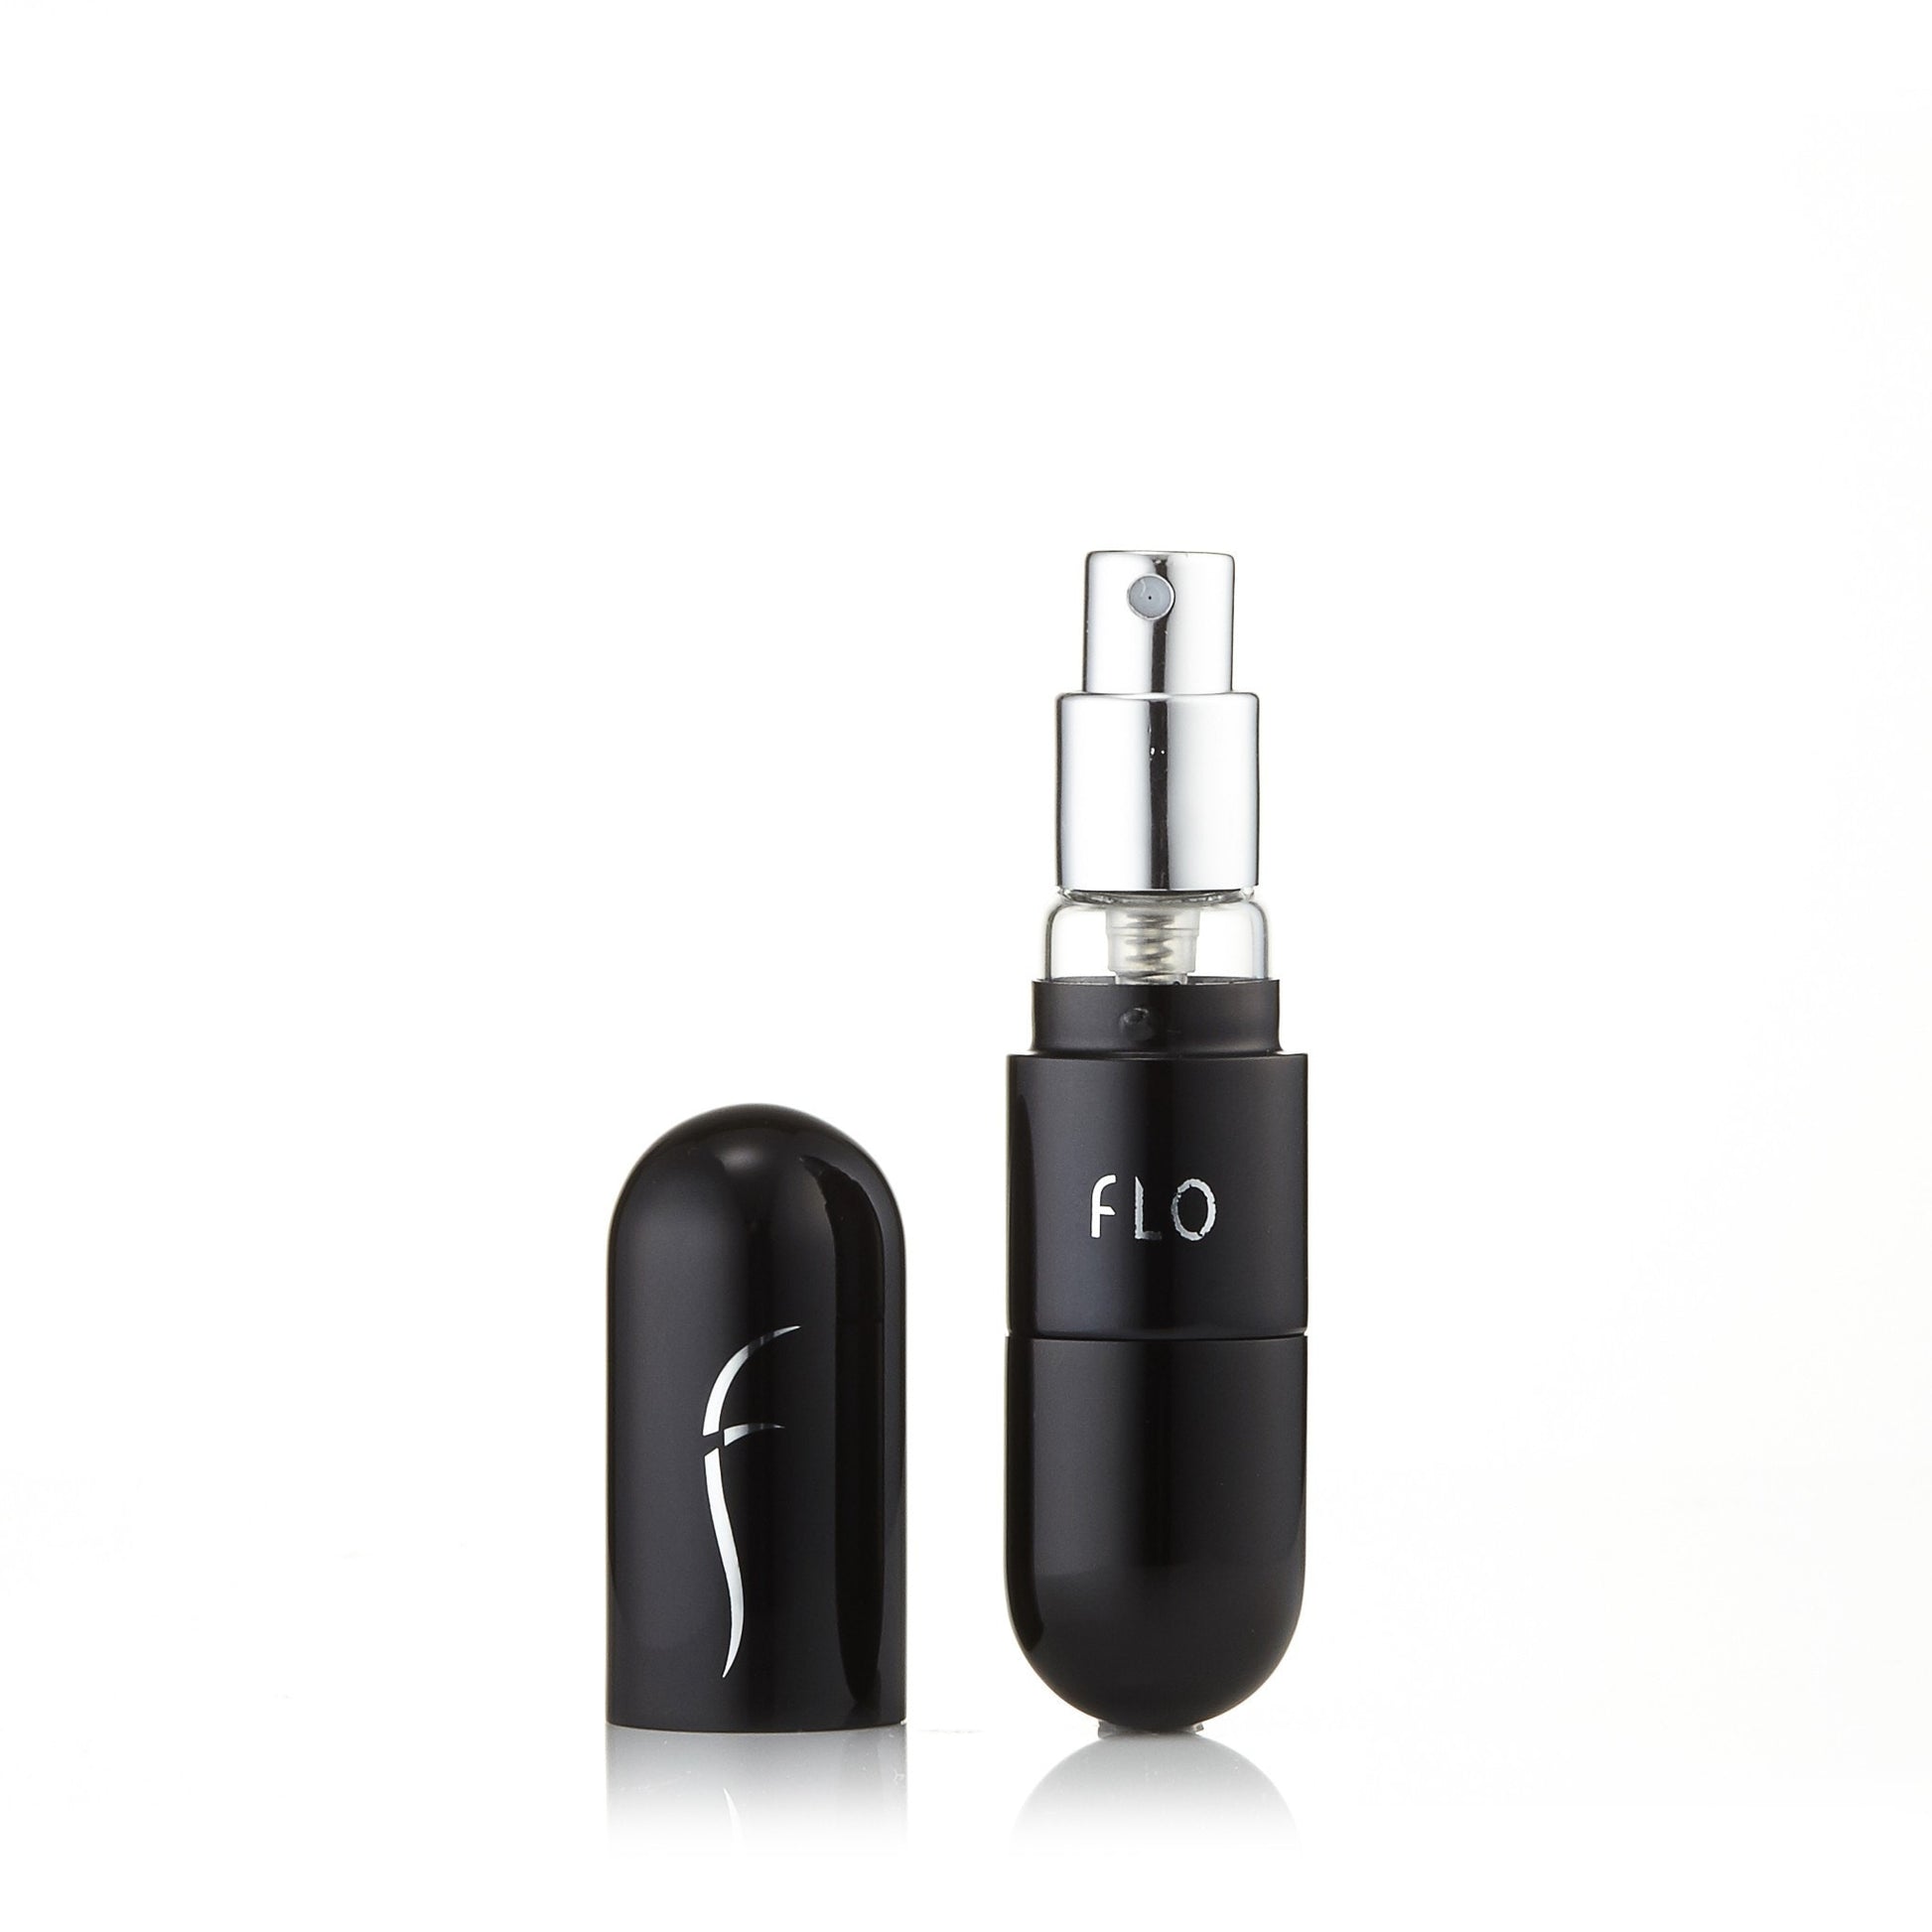 Refillable Perfume Atomizer by Flo Black Click to open in modal